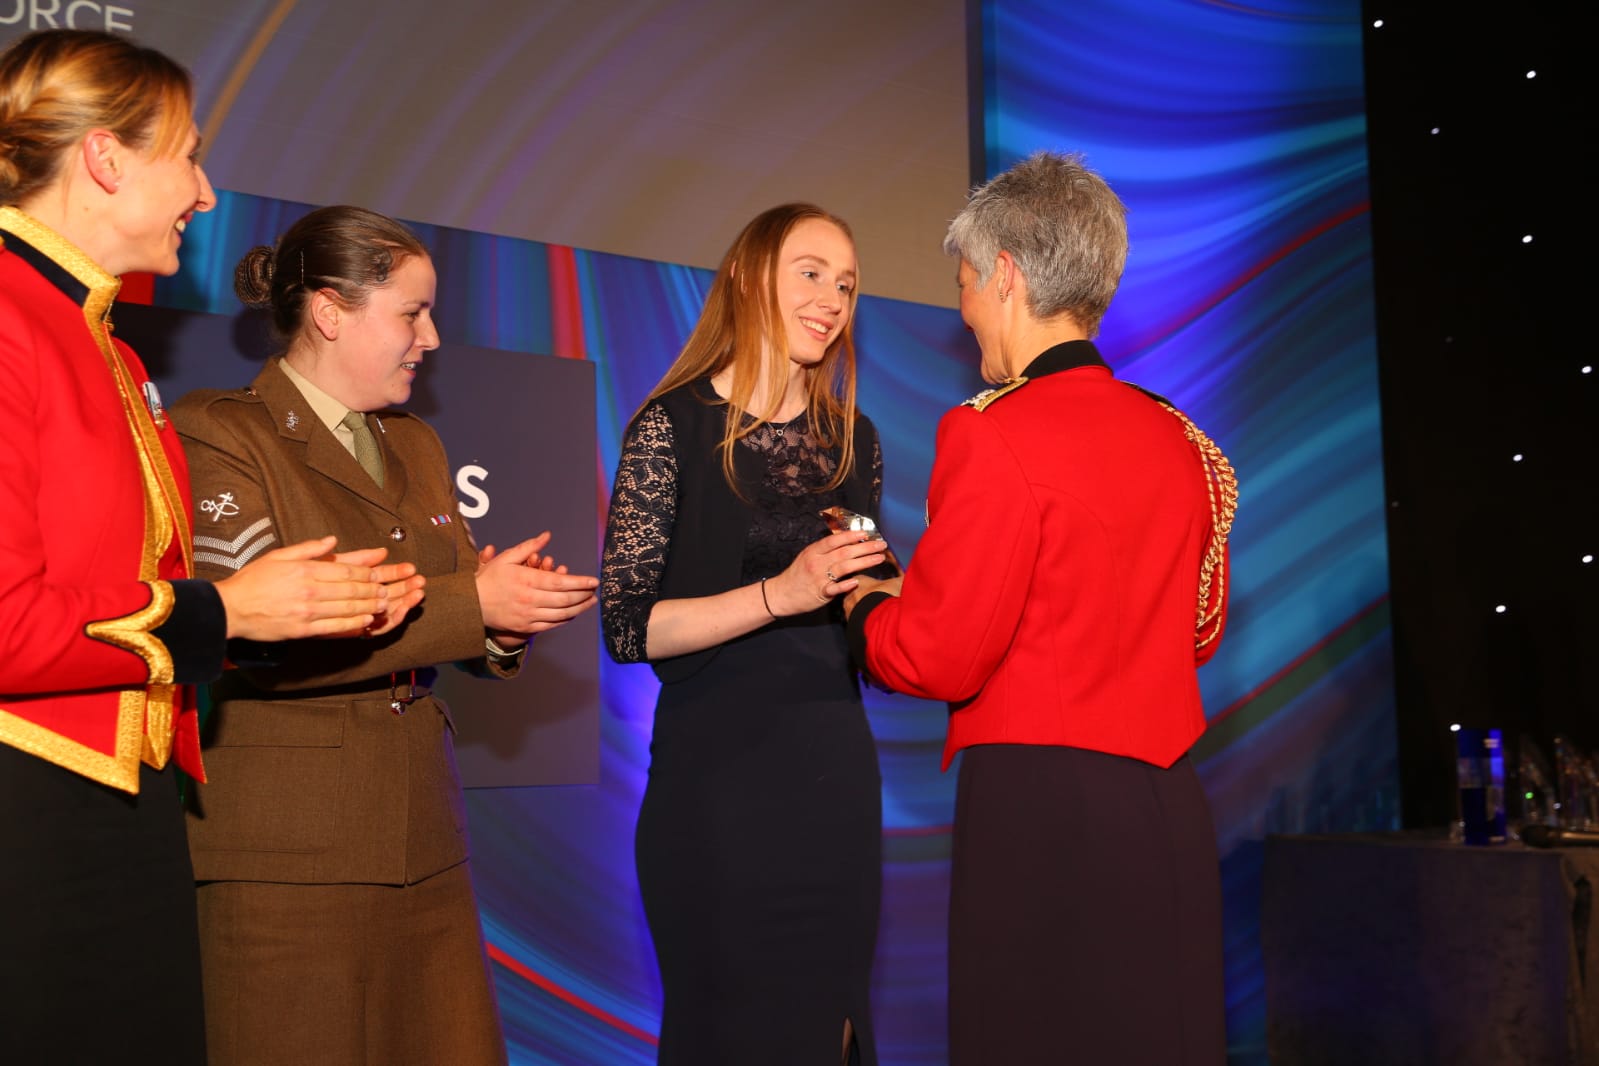 Image shows personnel receiving award.